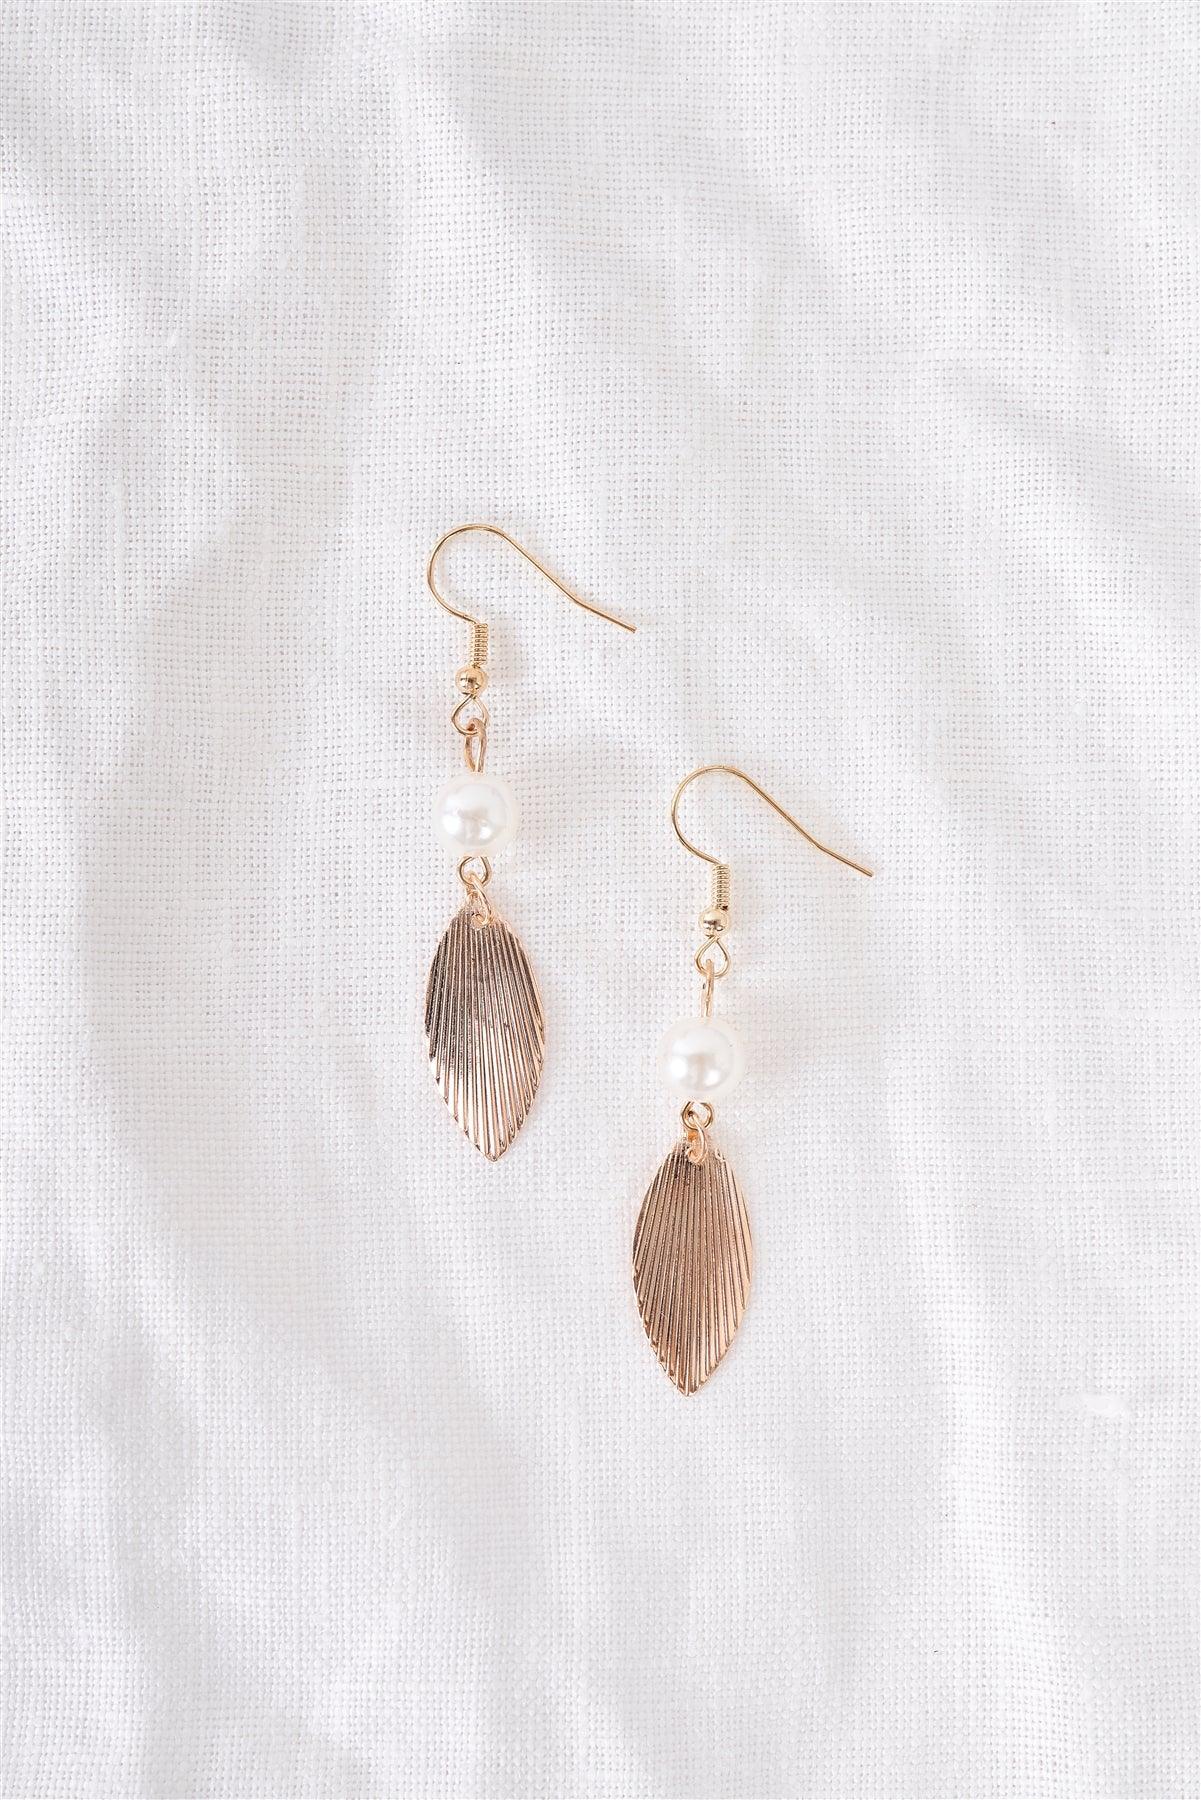 Gold & Pearl Feather Drop Earrings / 3 Pairs